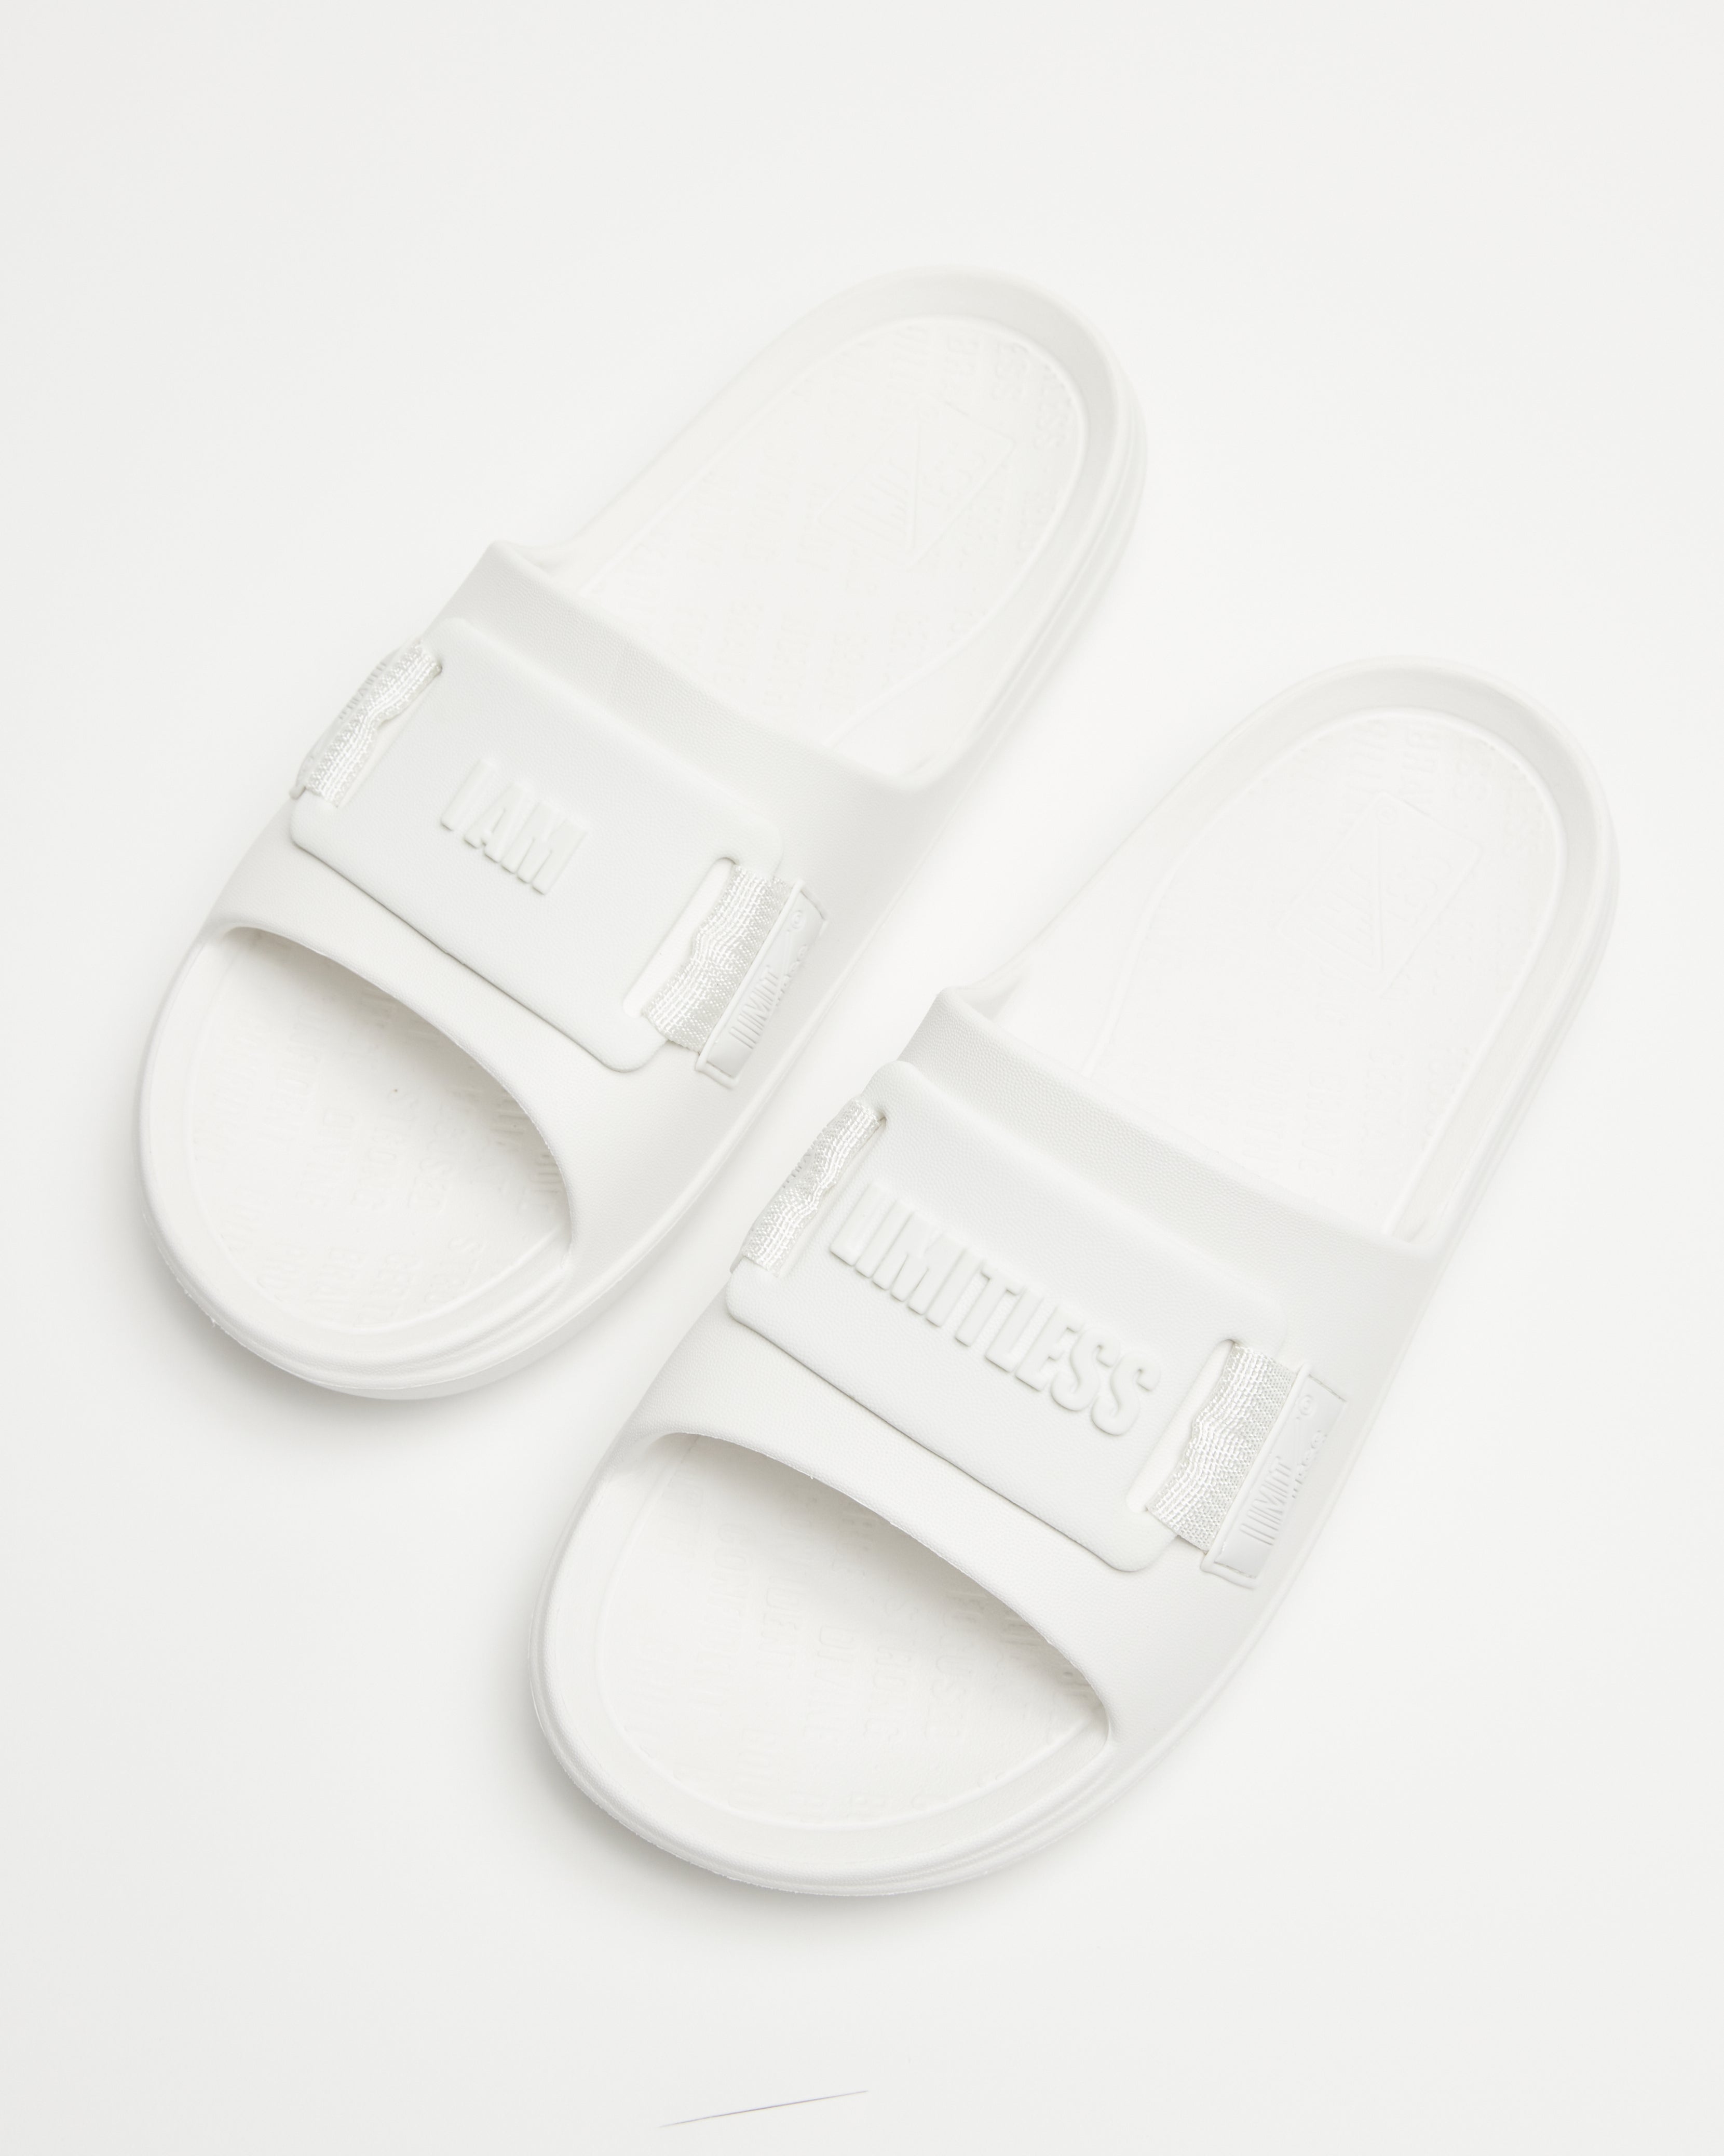 LIMITLESS SLIDES™ WITH ESSENTIAL TIBAH™ QUAD - IMMACULATE HEART ACADEMY EDITION